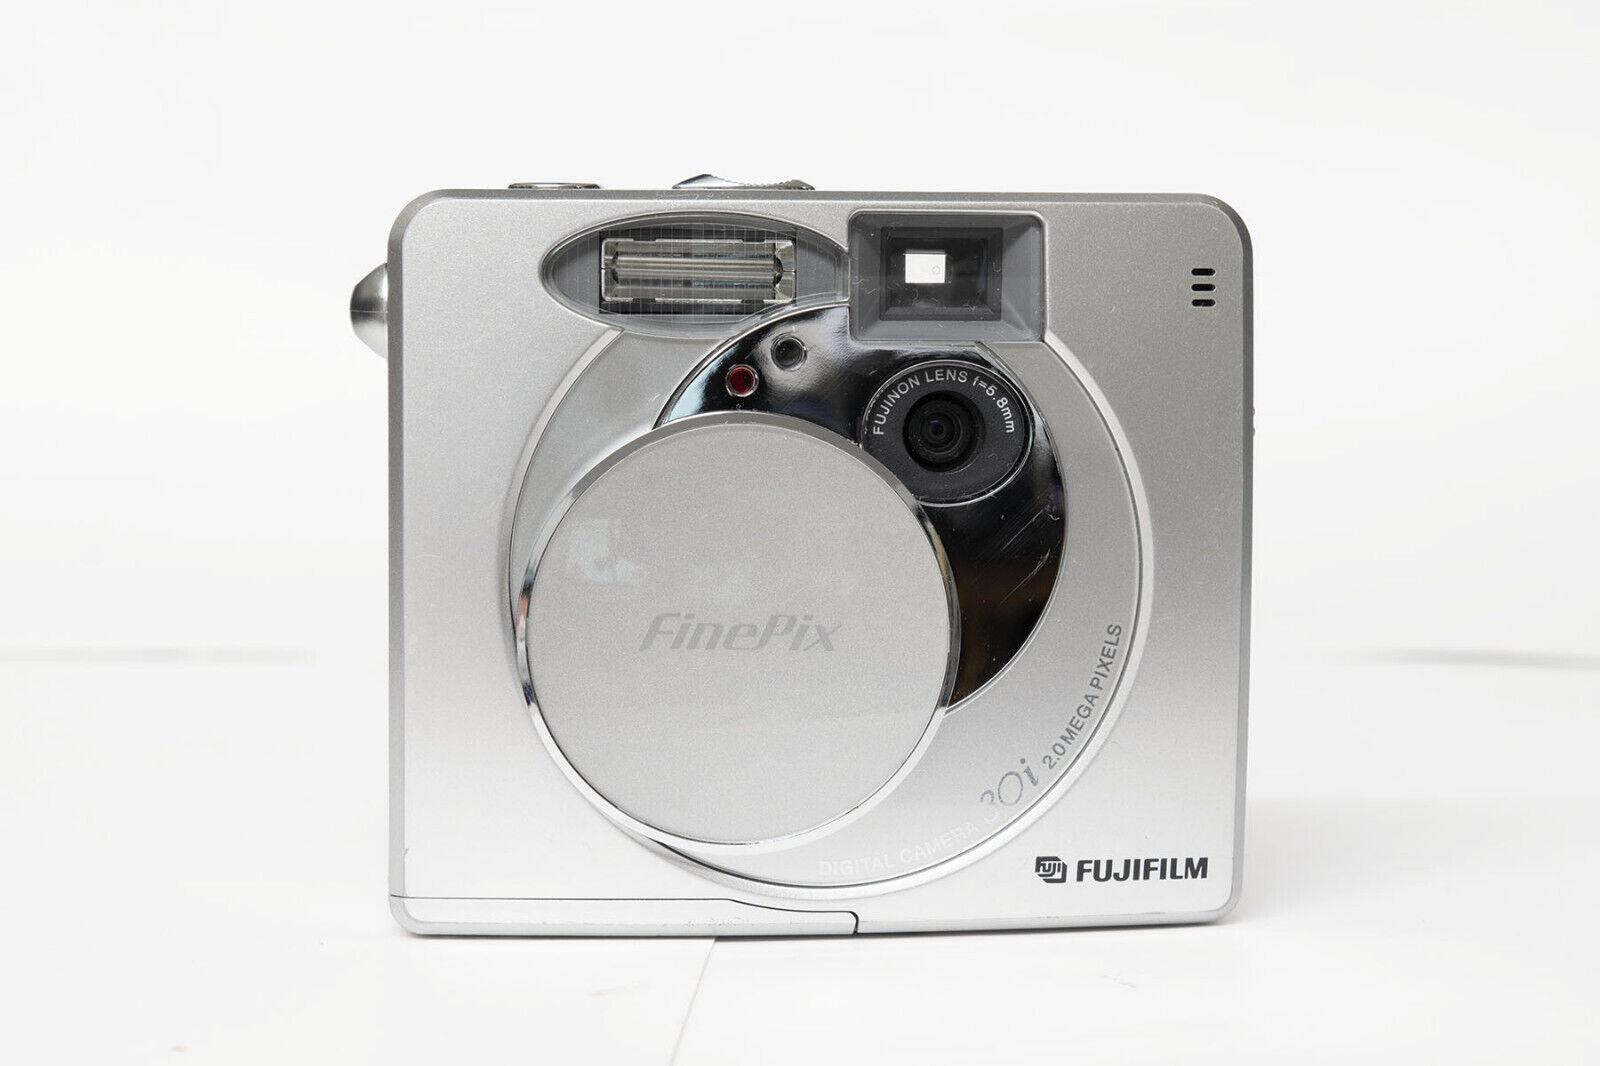 1 fully working Fujifilm Finepix 30i silver digital camera without box for  sale!